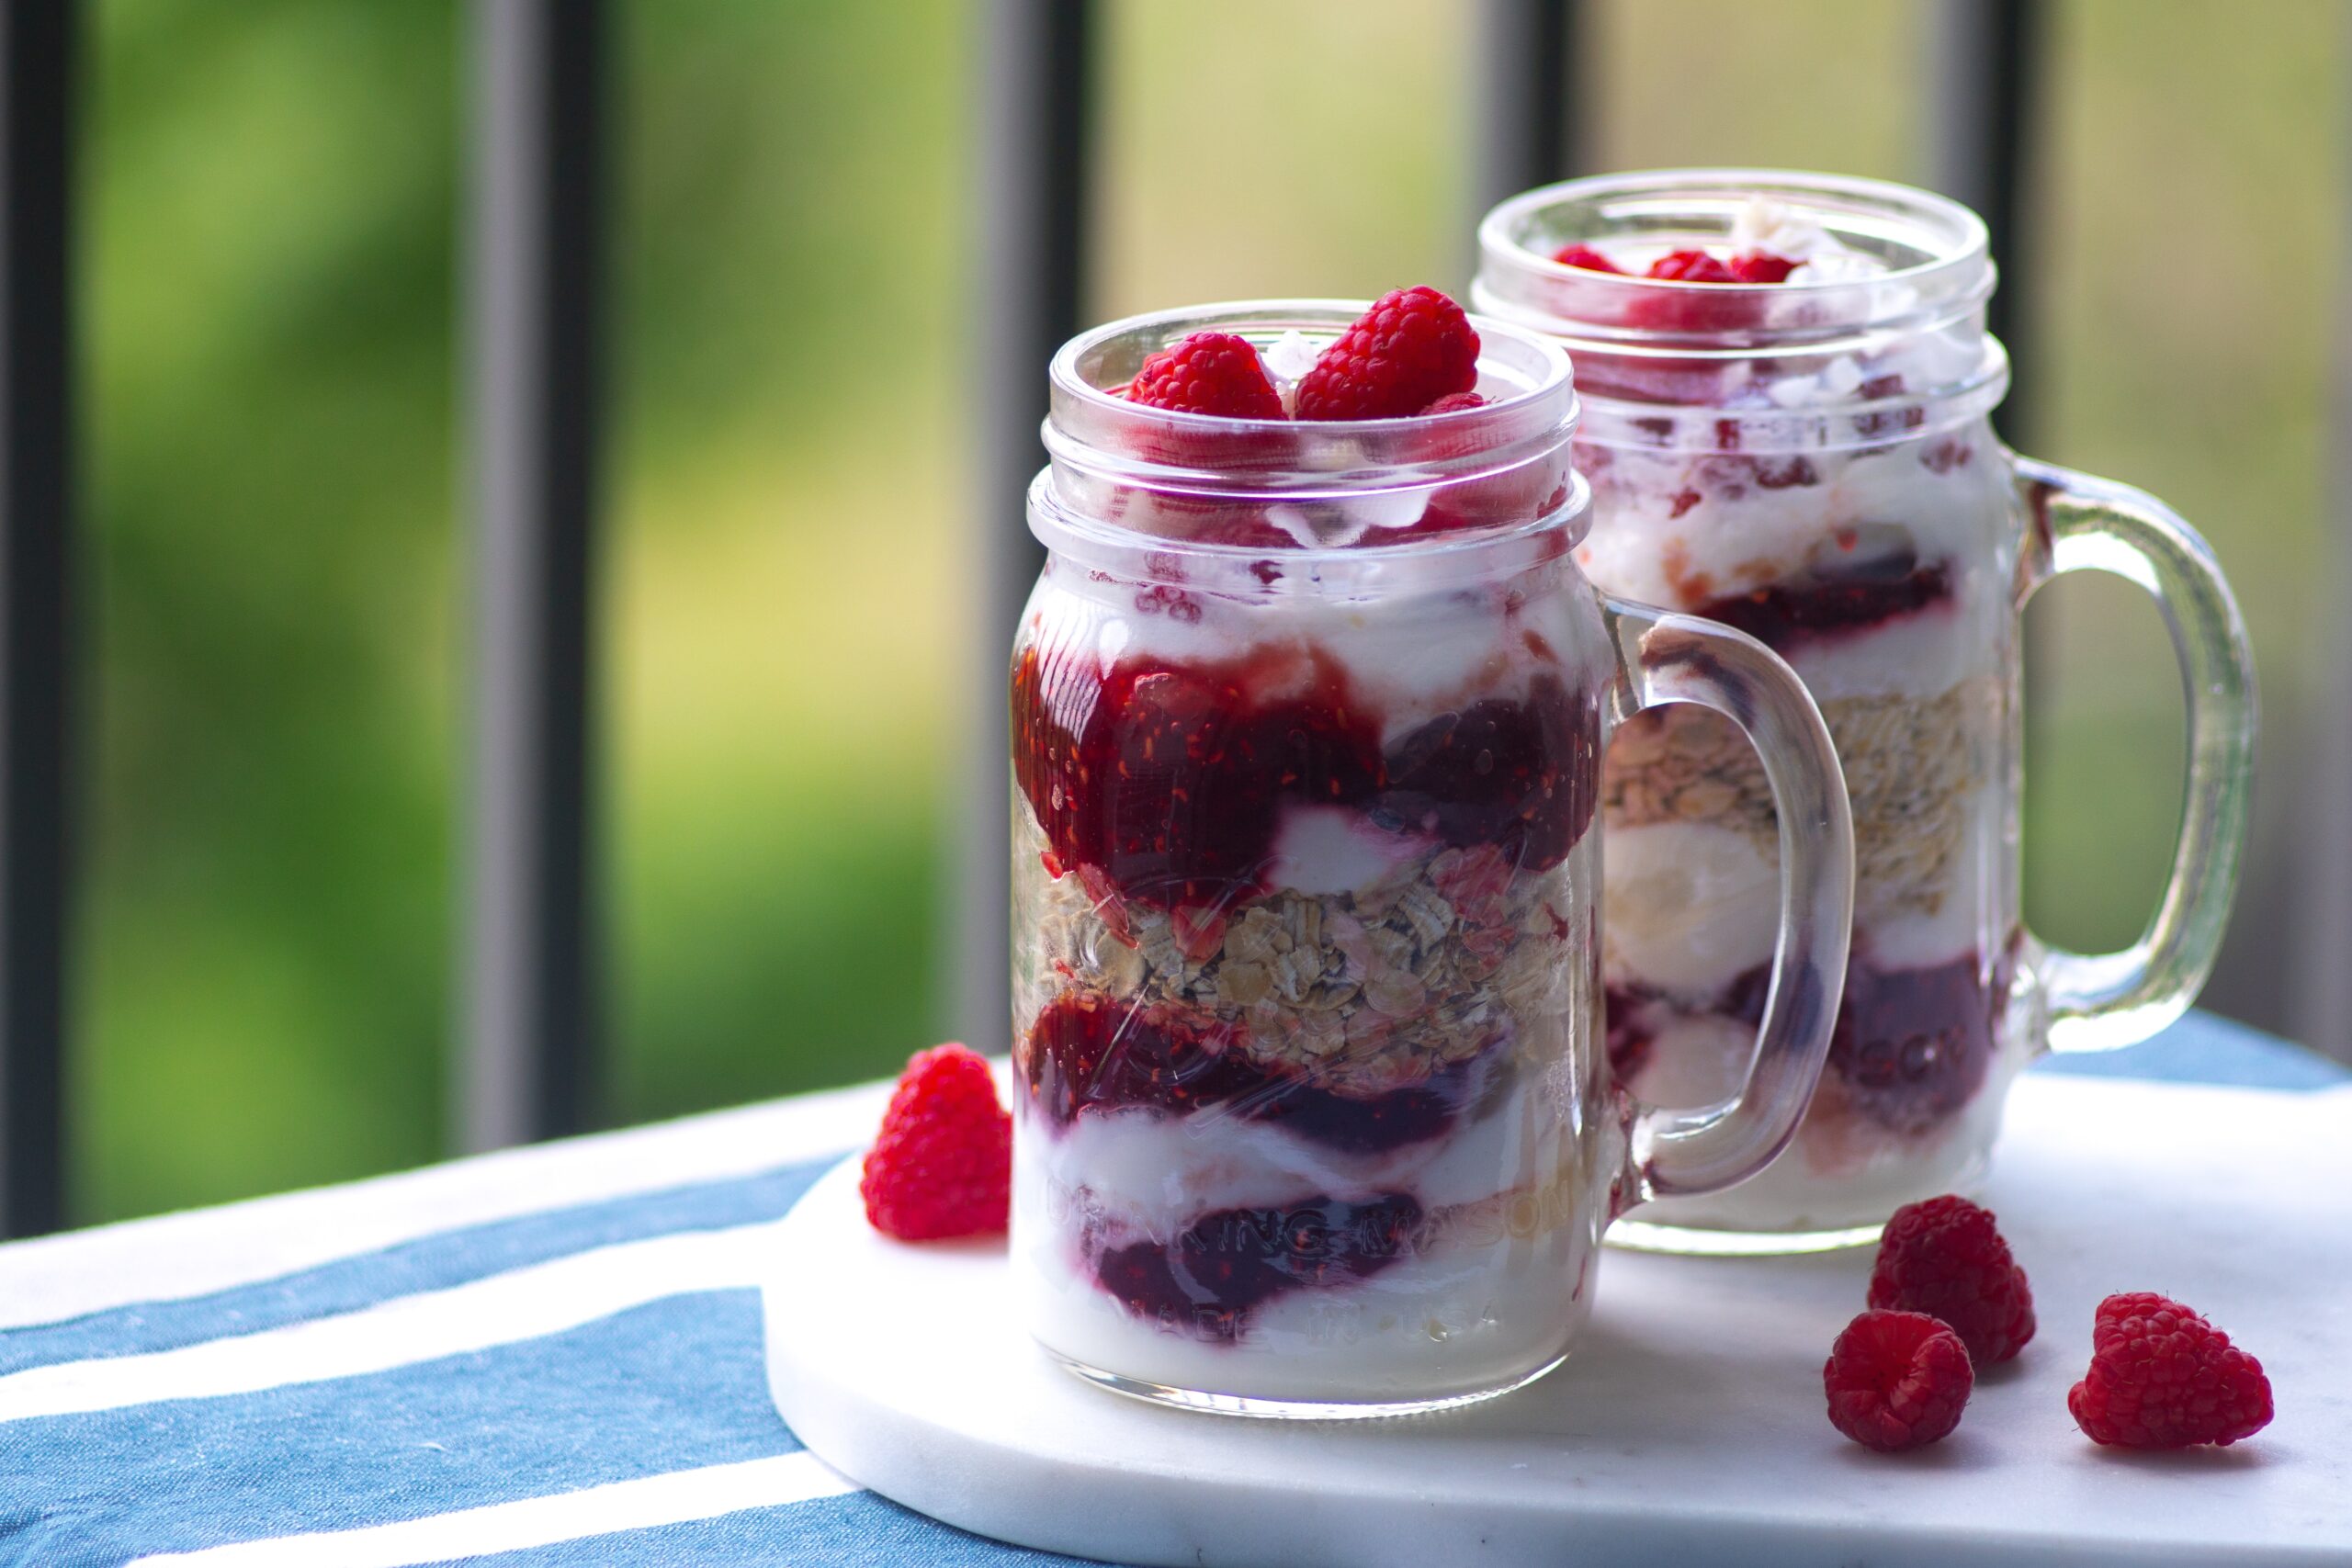 overnight oats in a jar with yogurt and raspberries